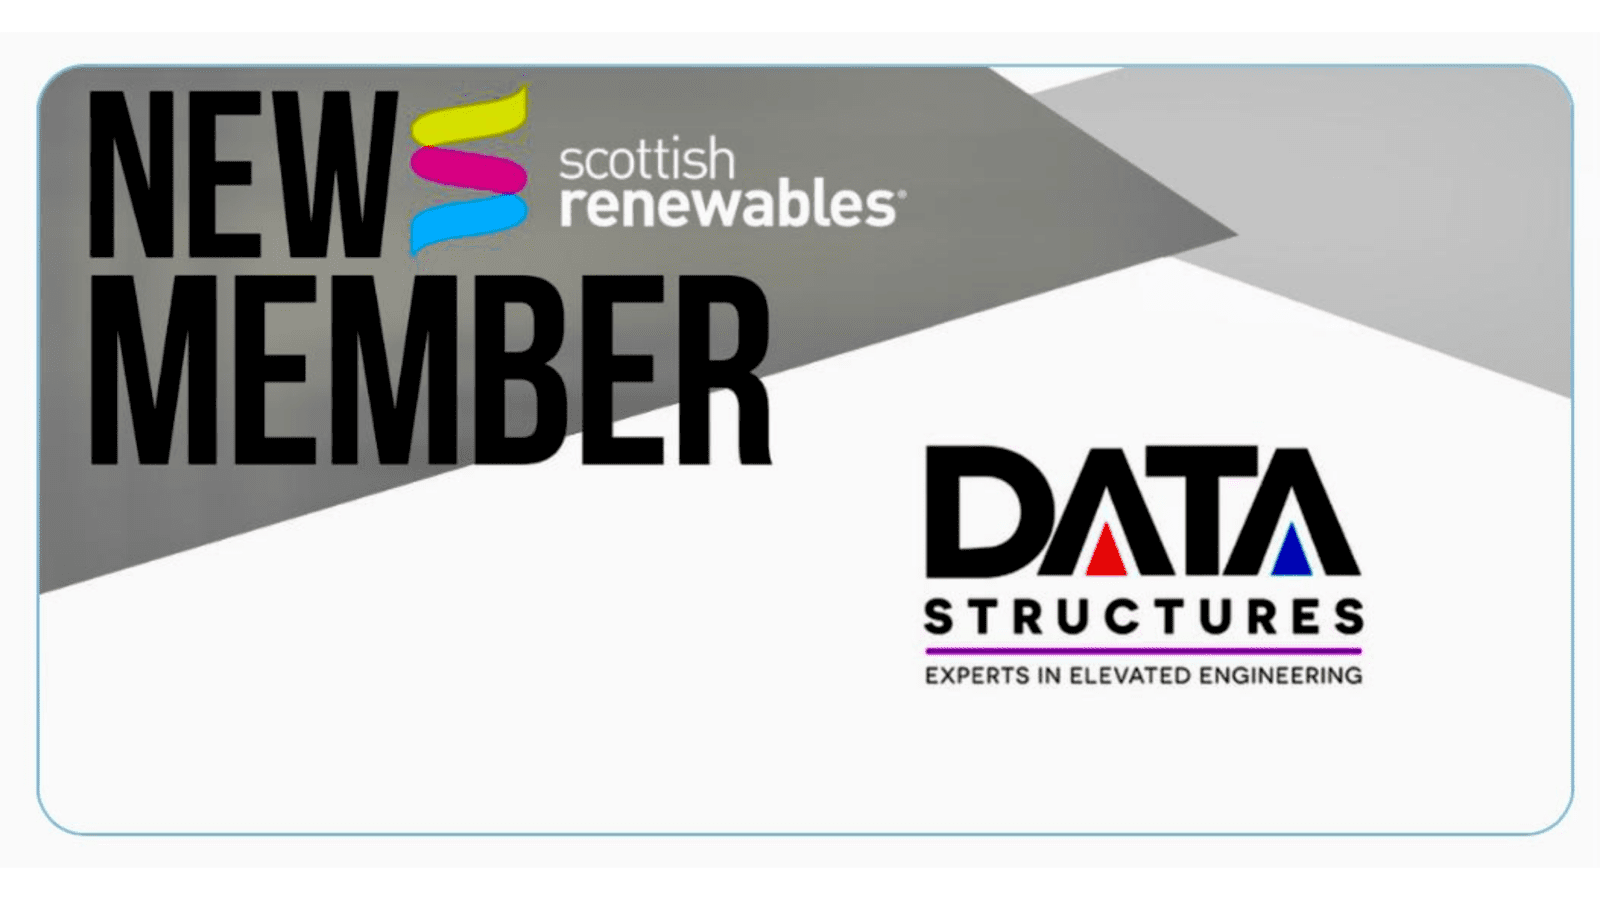 Data Structures are now members of Scottish Renewables